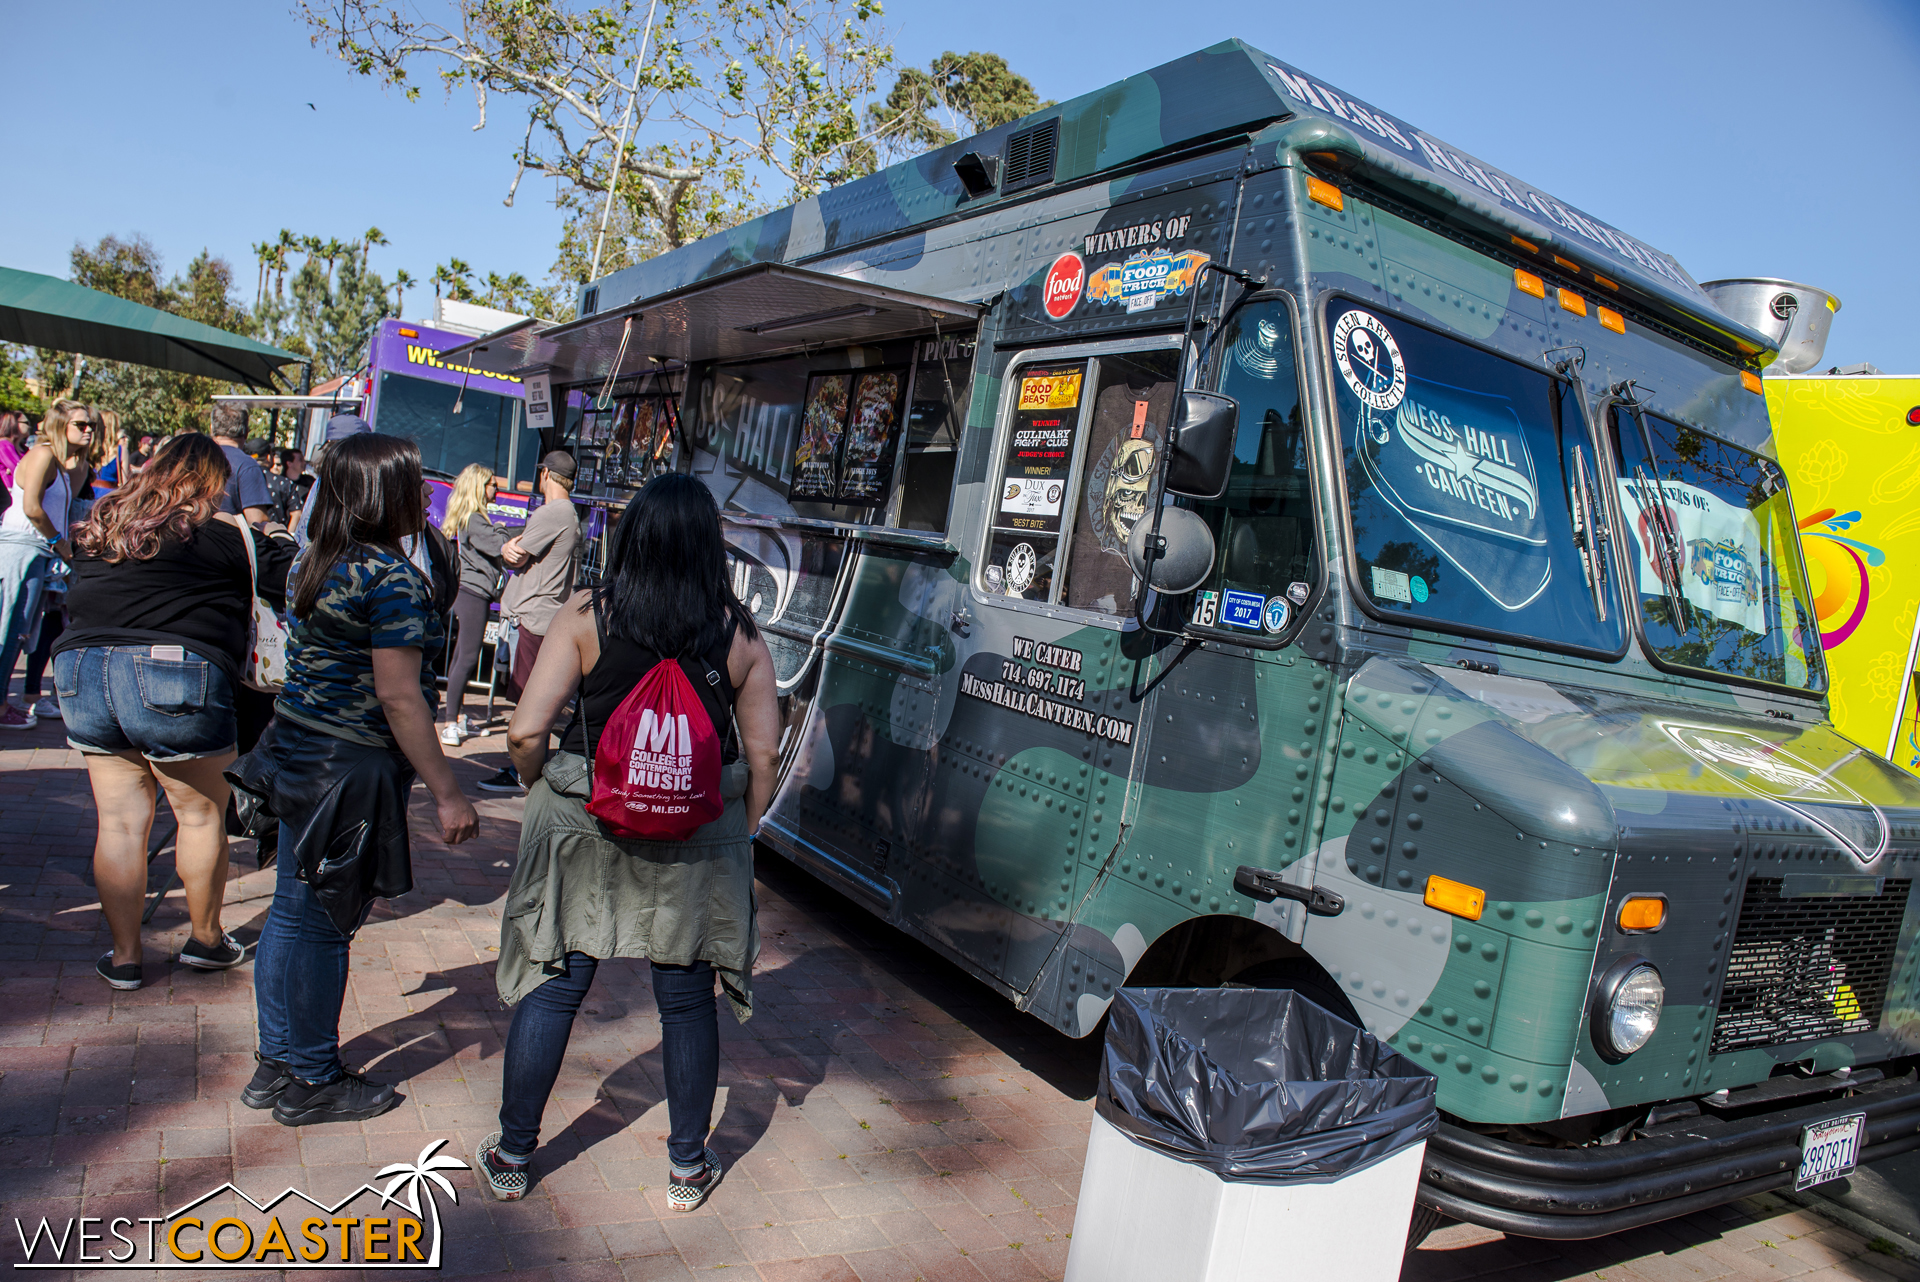  More food trucks at the interior of the grounds. 